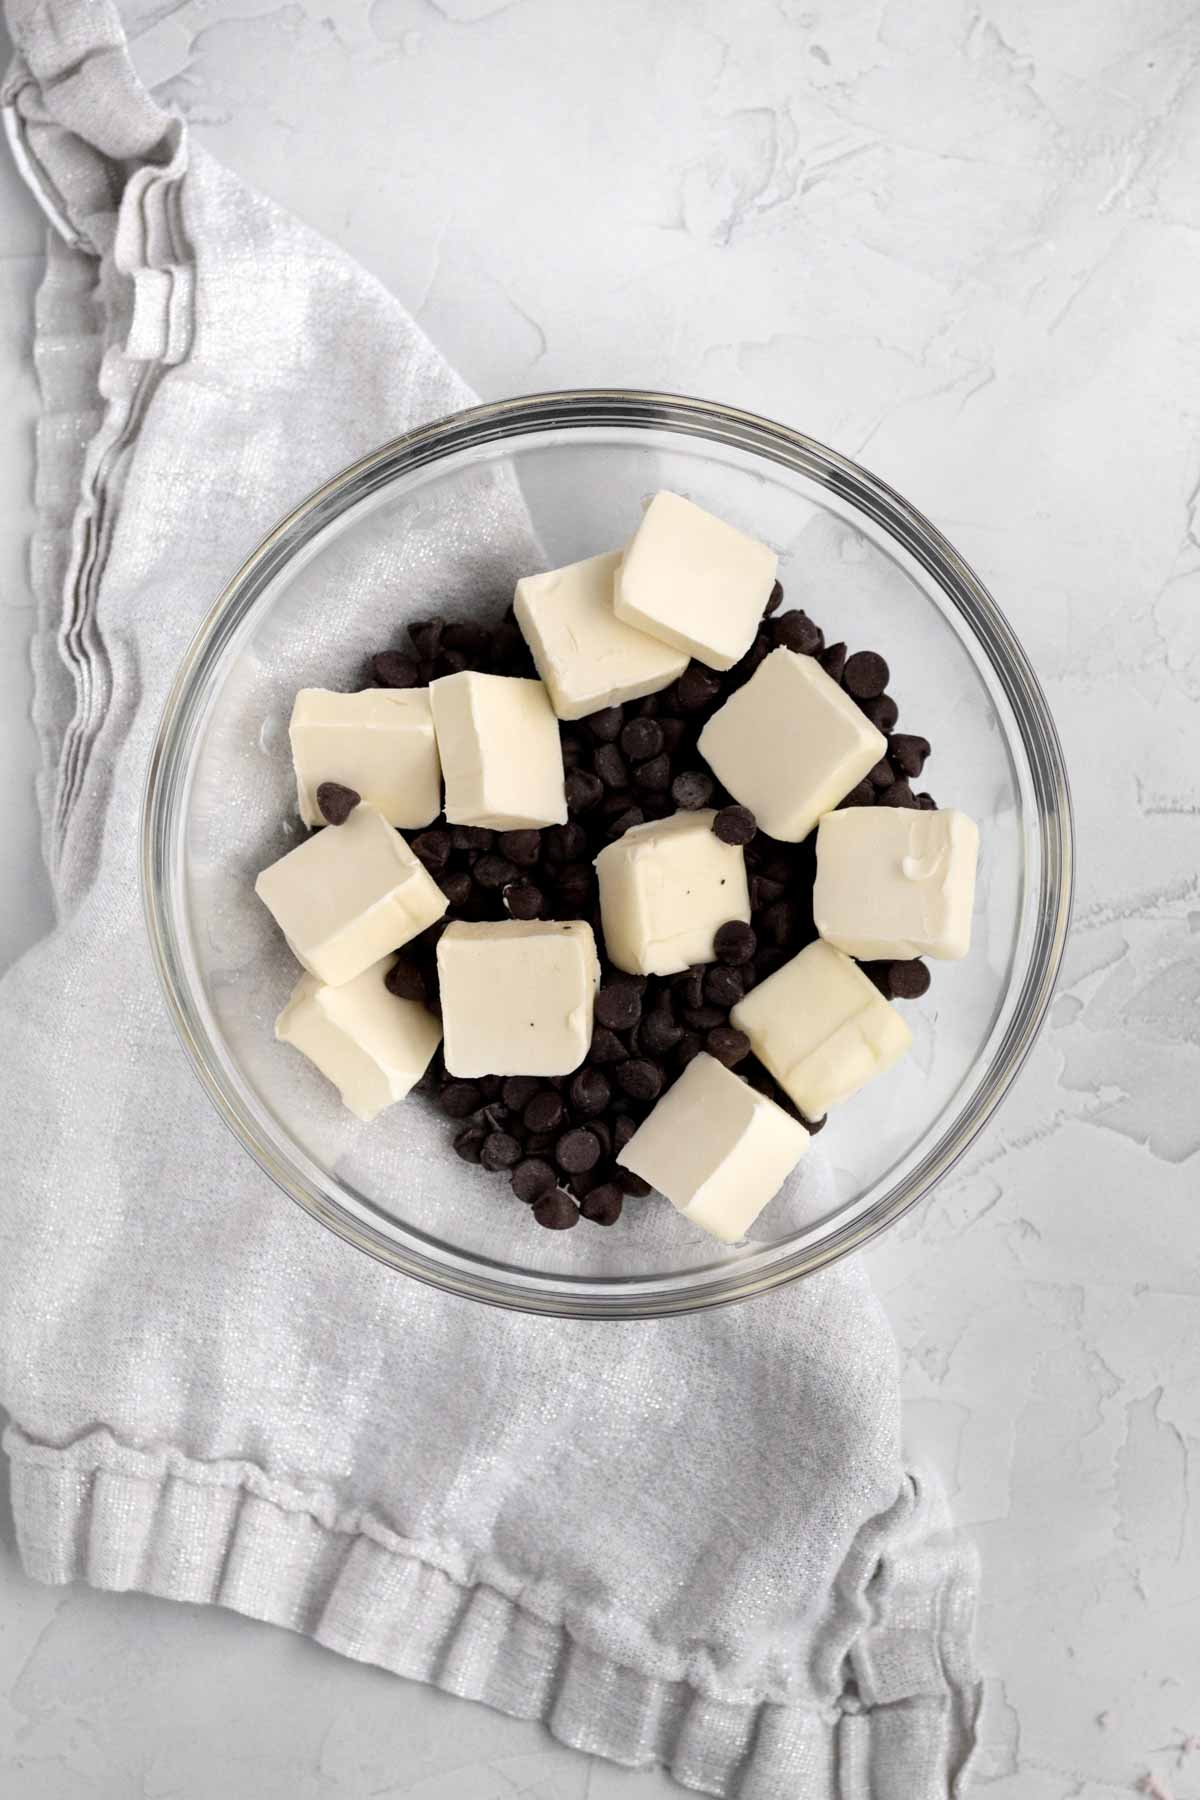 Chocolate chips and butter slices in a bowl.